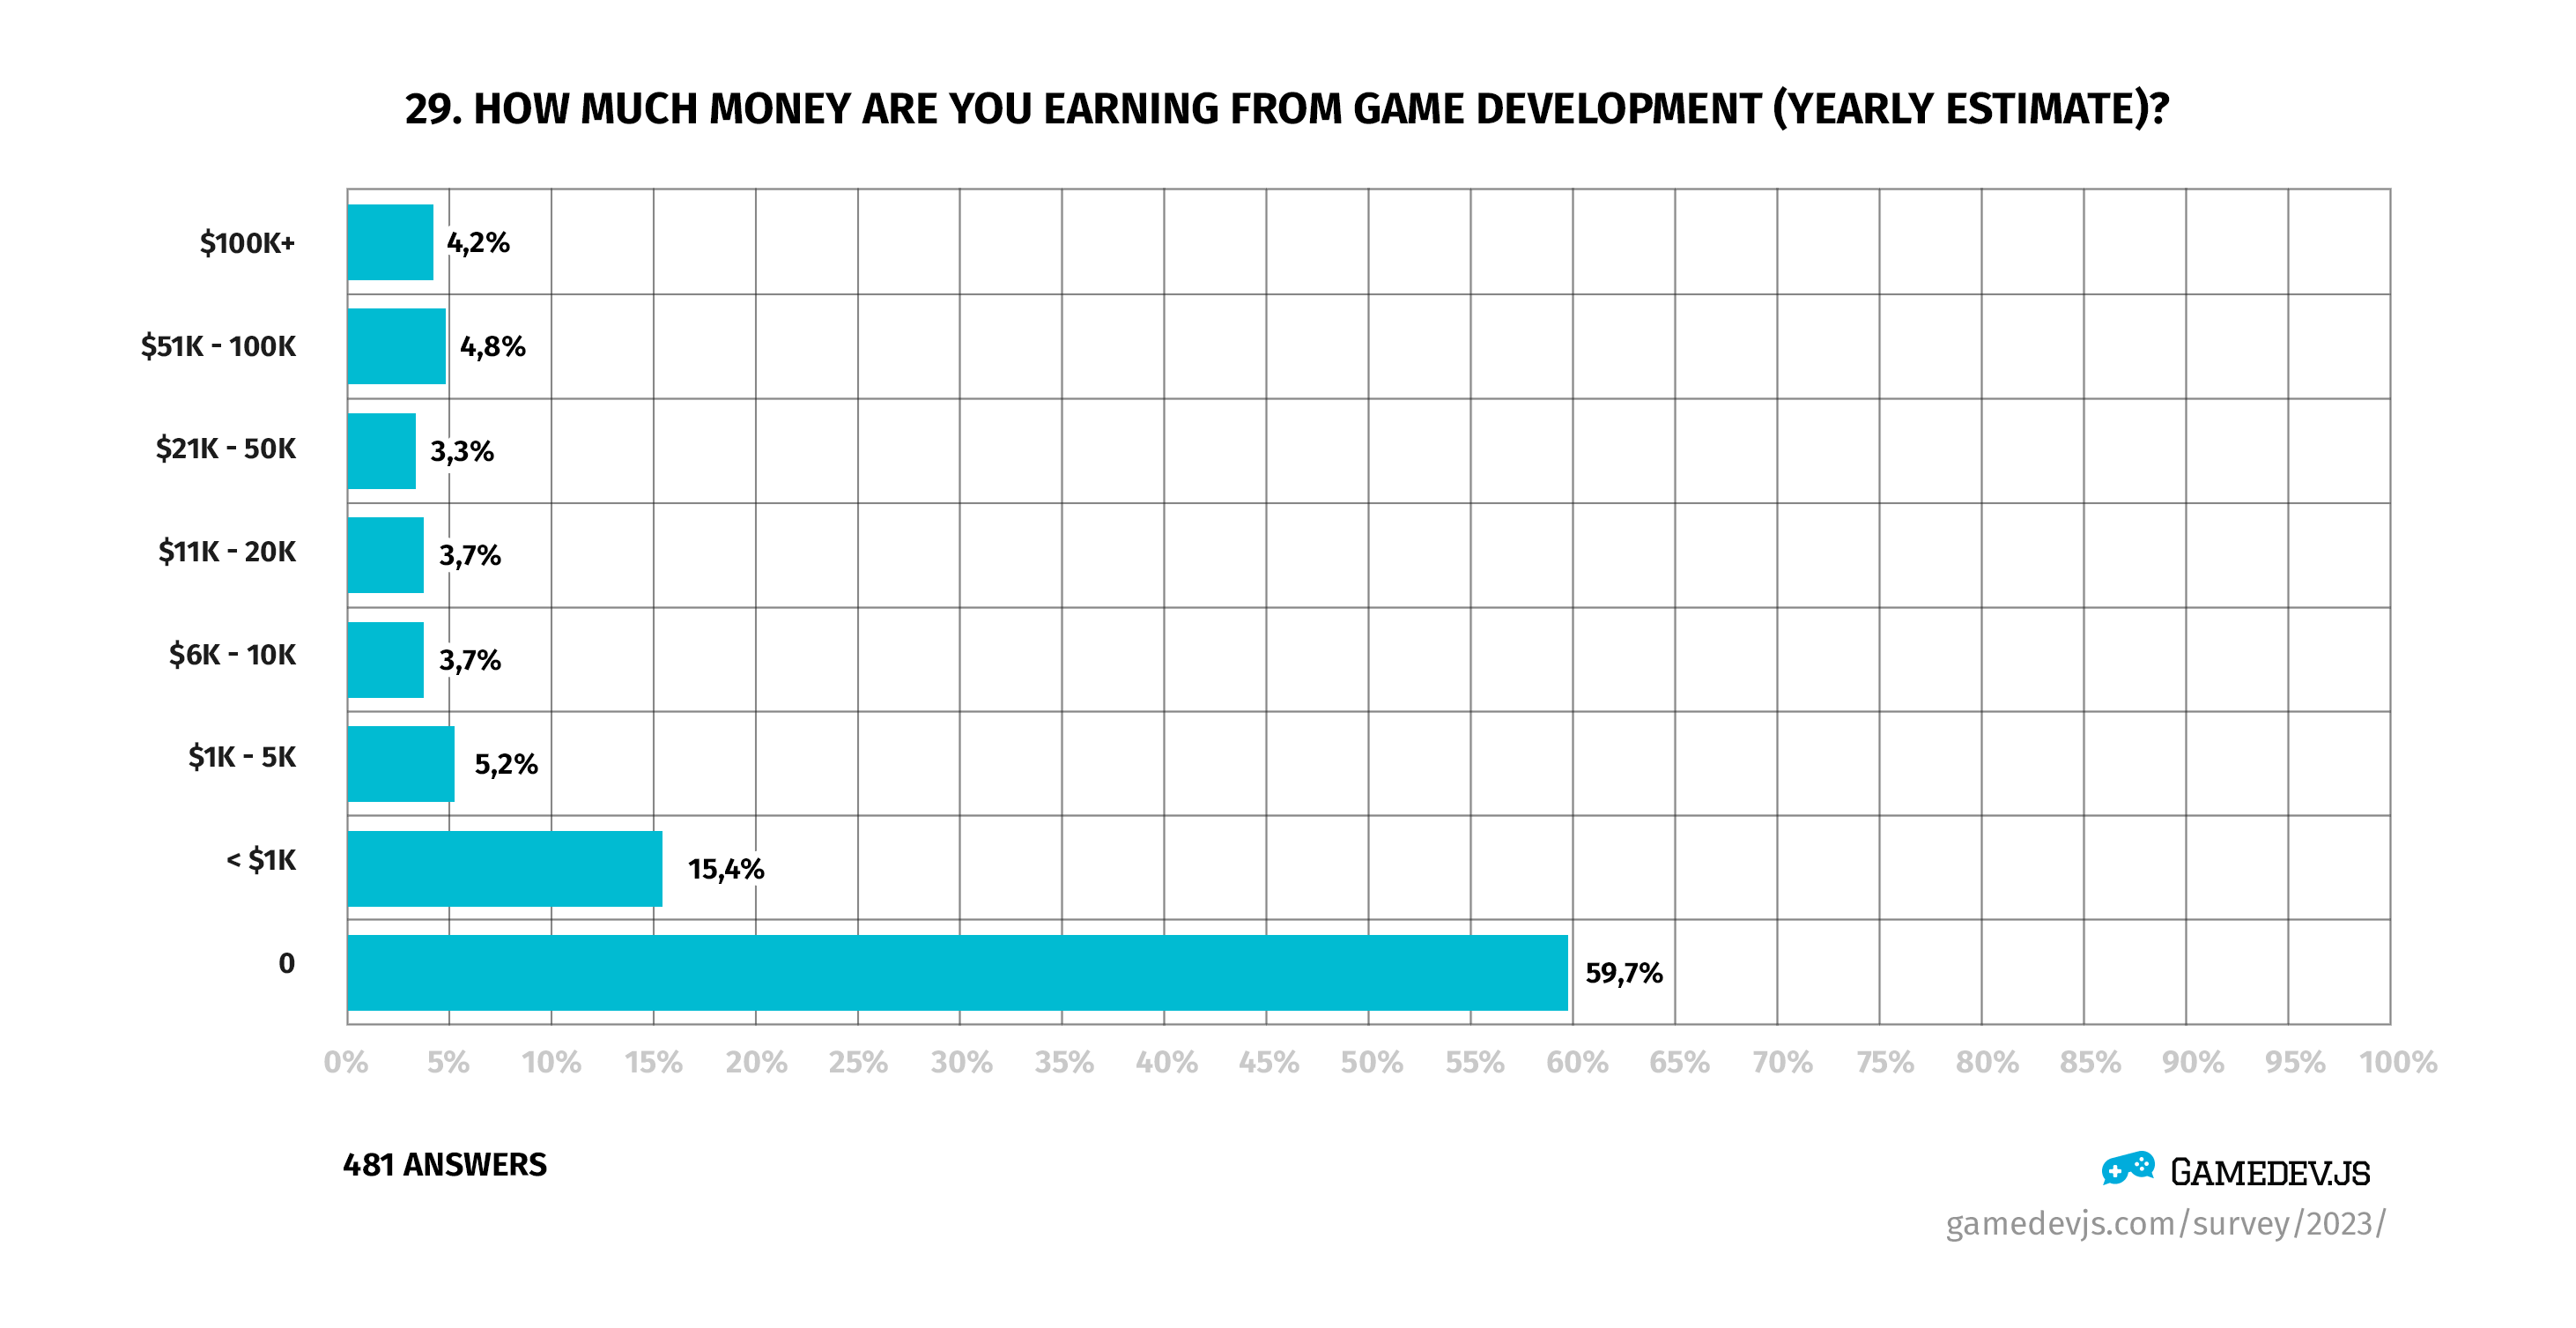 Gamedev.js Survey 2023 - Question #29: How much money are you earning from game development (yearly estimate)?